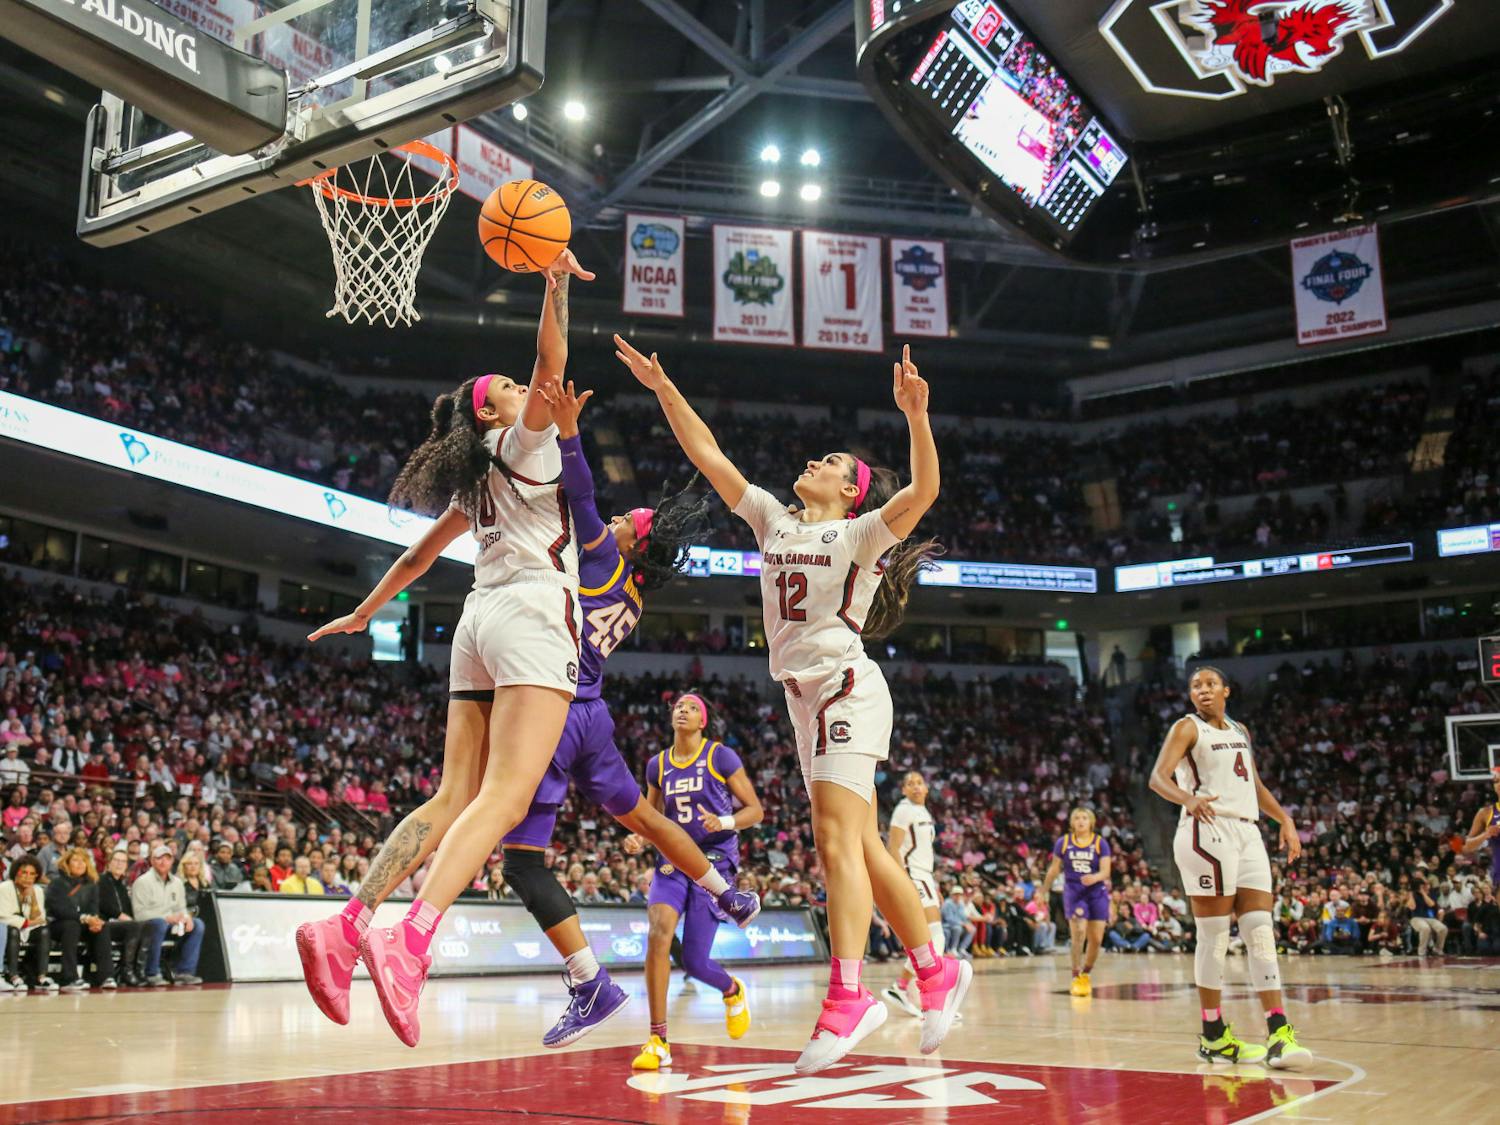 Gamecocks' junior center Kamilla Cardoso and senior guard Brea Beal attempt to block a shot put up by LSU’s Alexis Morris during the teams' matchup at Colonial Life Arena on Feb. 12, 2023. The Gamecocks beat the Tigers 88-64.